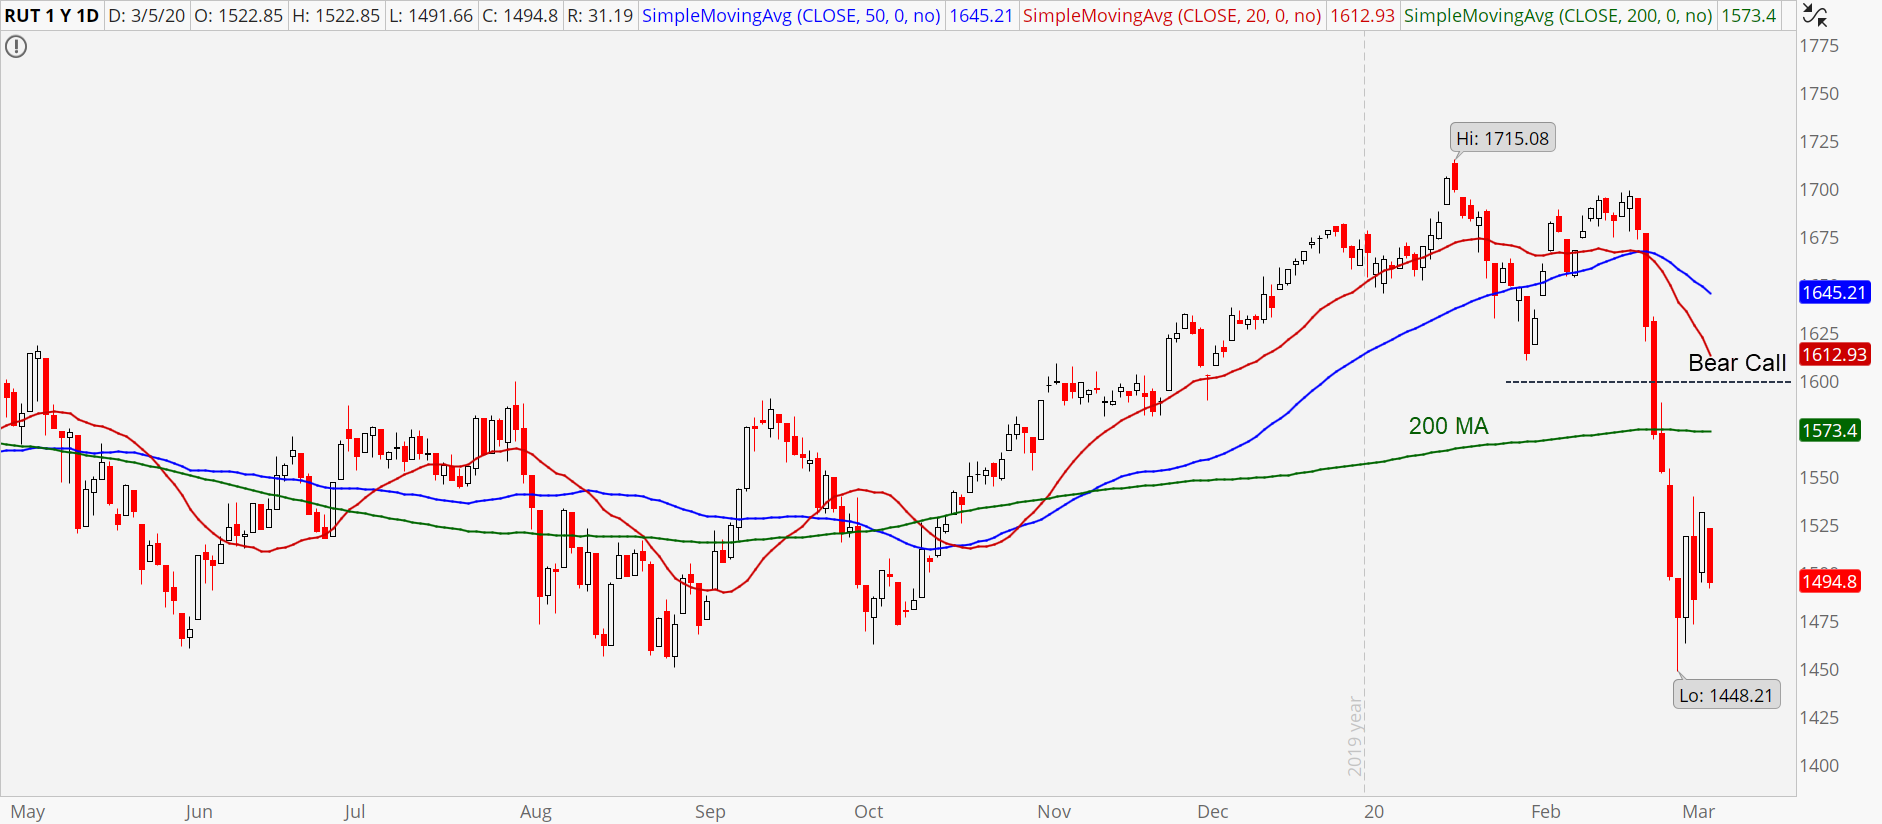 Bearish Options Trades to Consider: Russell 2000 Index (RUT)